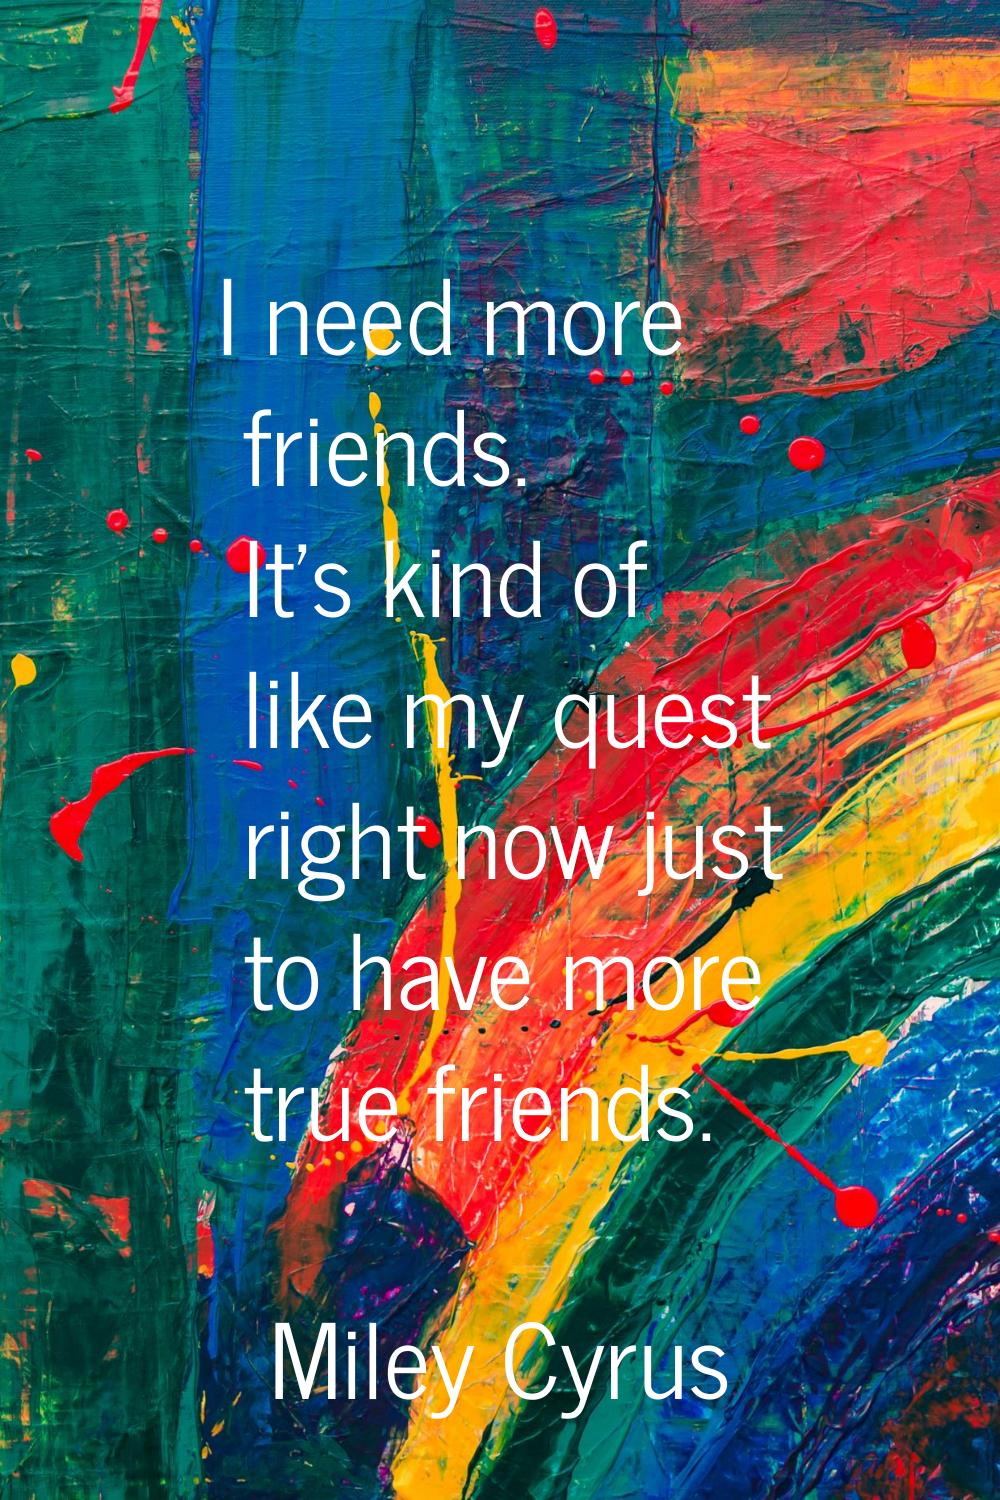 I need more friends. It's kind of like my quest right now just to have more true friends.